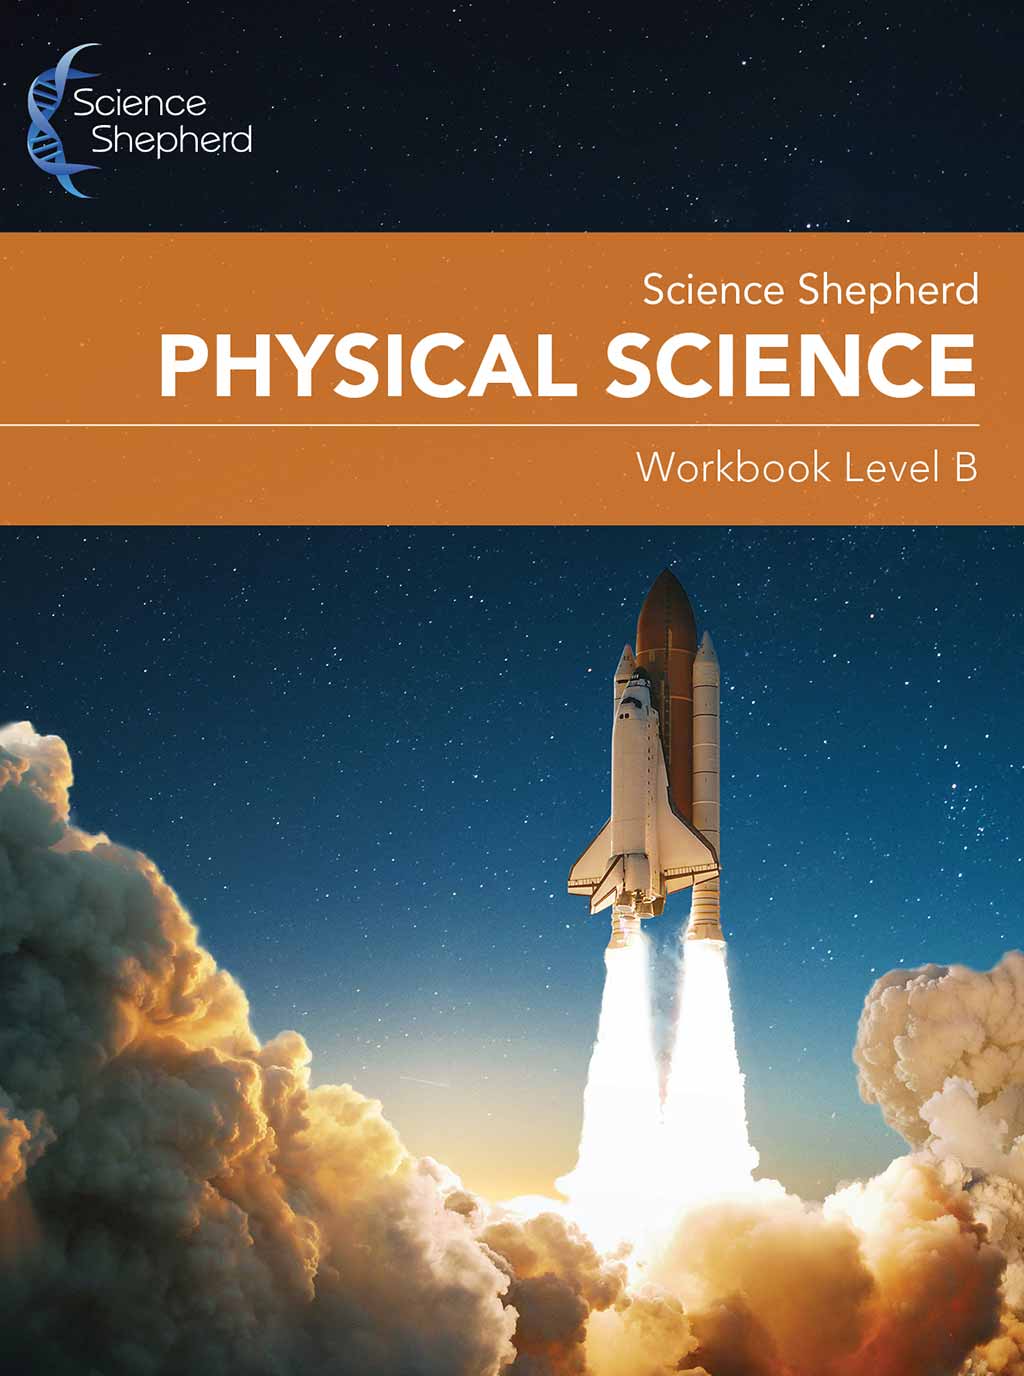 Homeschool Physical Science programs Workbook Level B cover of a shuttle launch at twilight